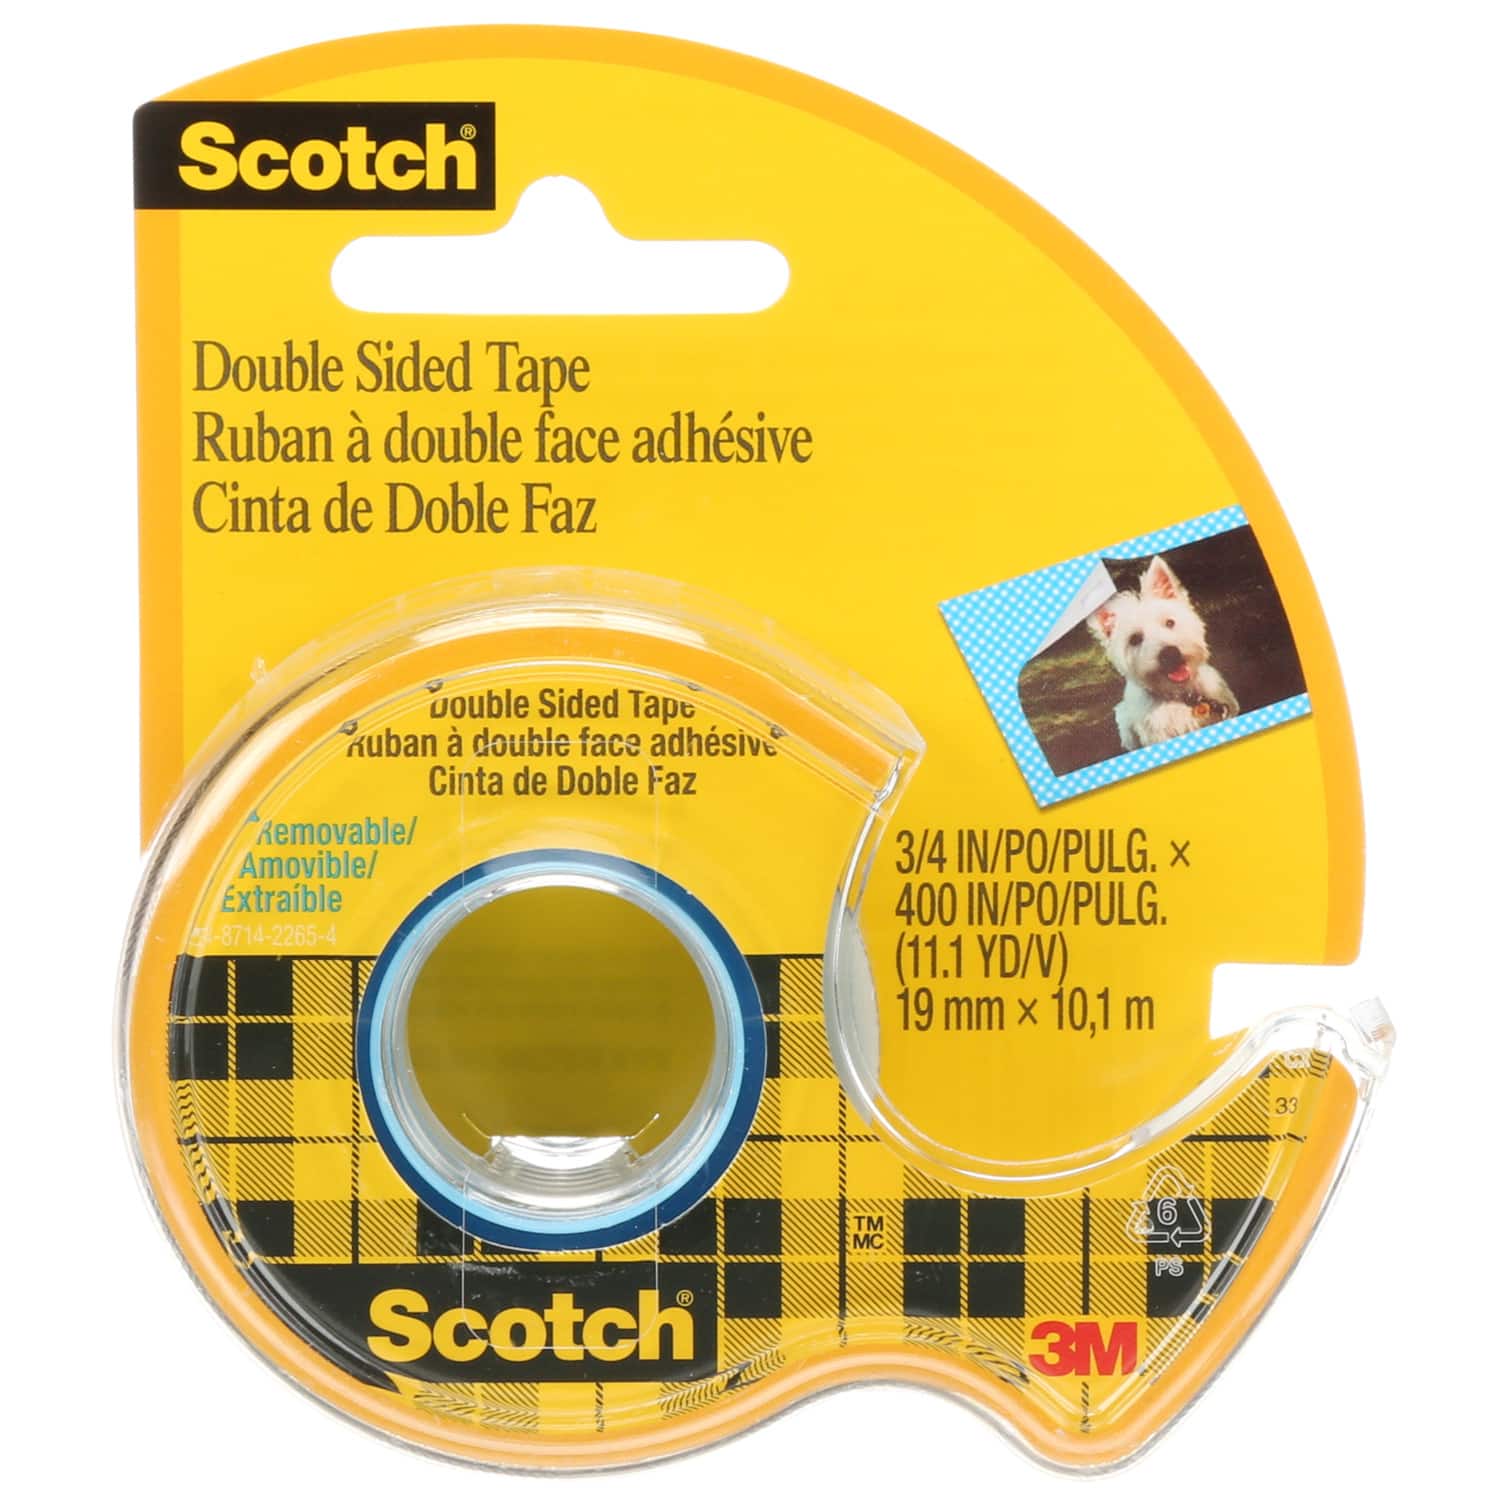 Double Sided Tape & Storage (1roll Pack), Washable Reusable Non-Marking Scotch Tape, Removable Cuttable Wall for Home, Office, Car, Outdoor Use